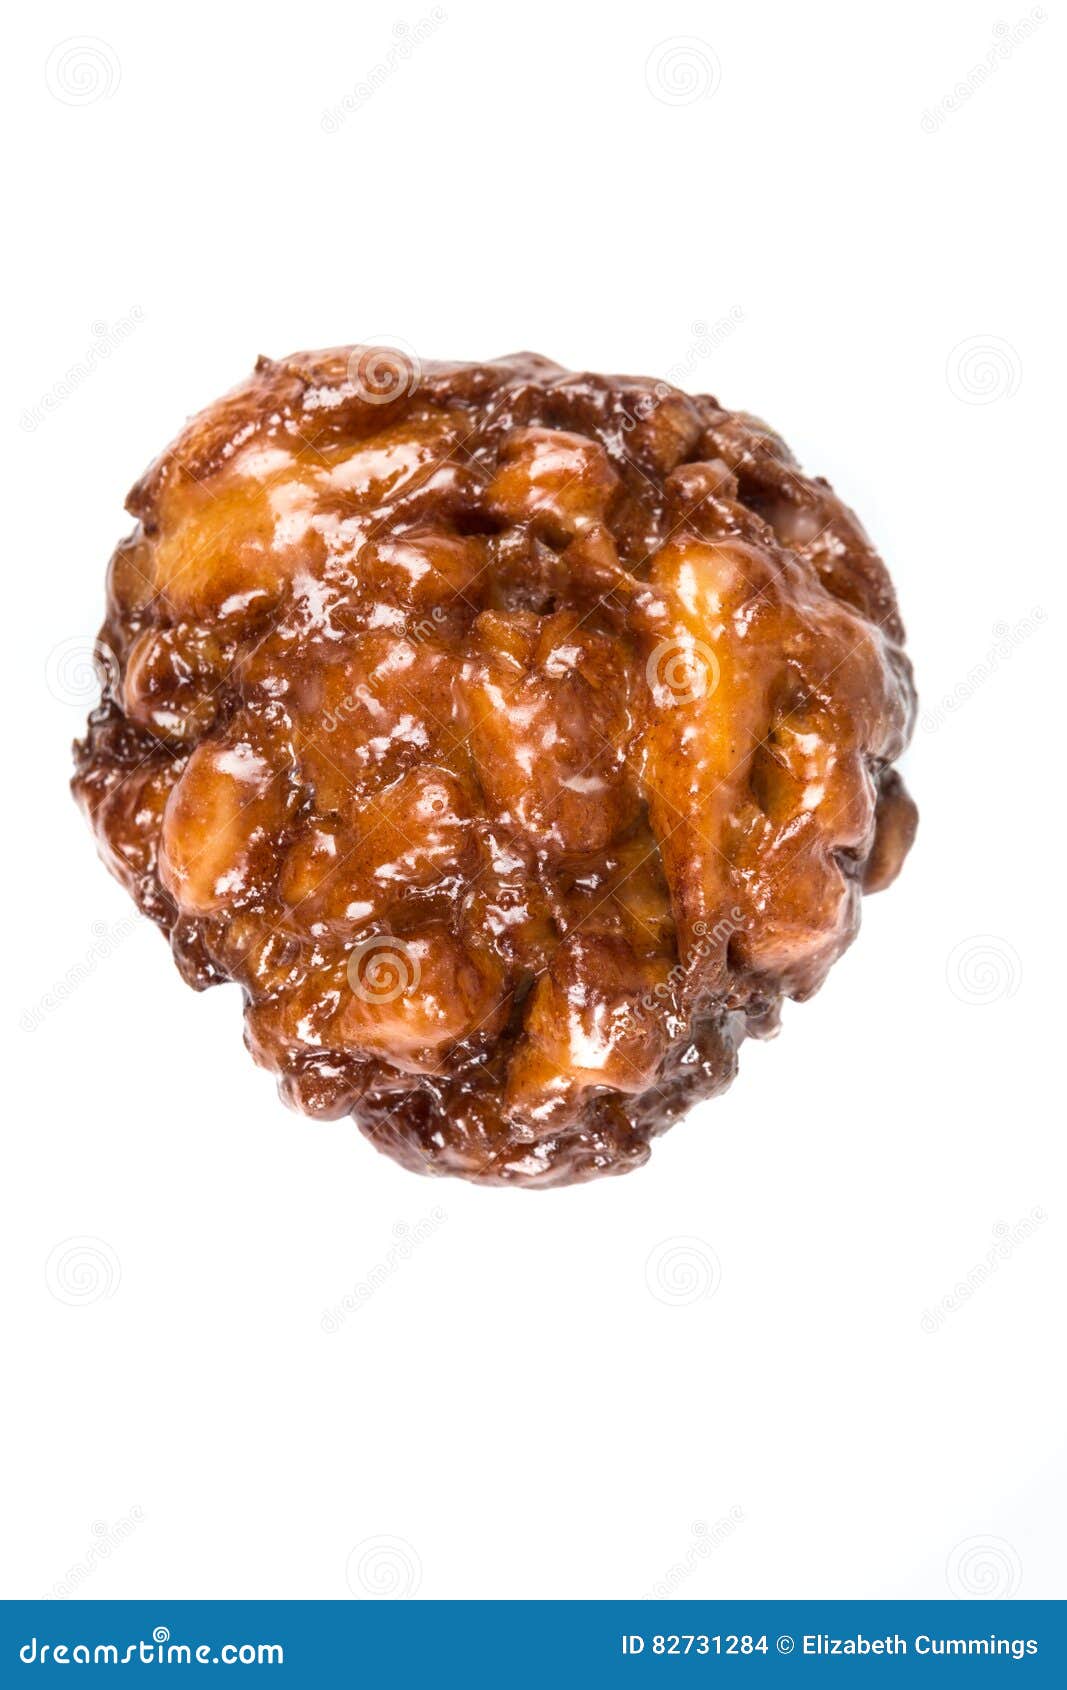 Frosted apple fritter isolated on a white background